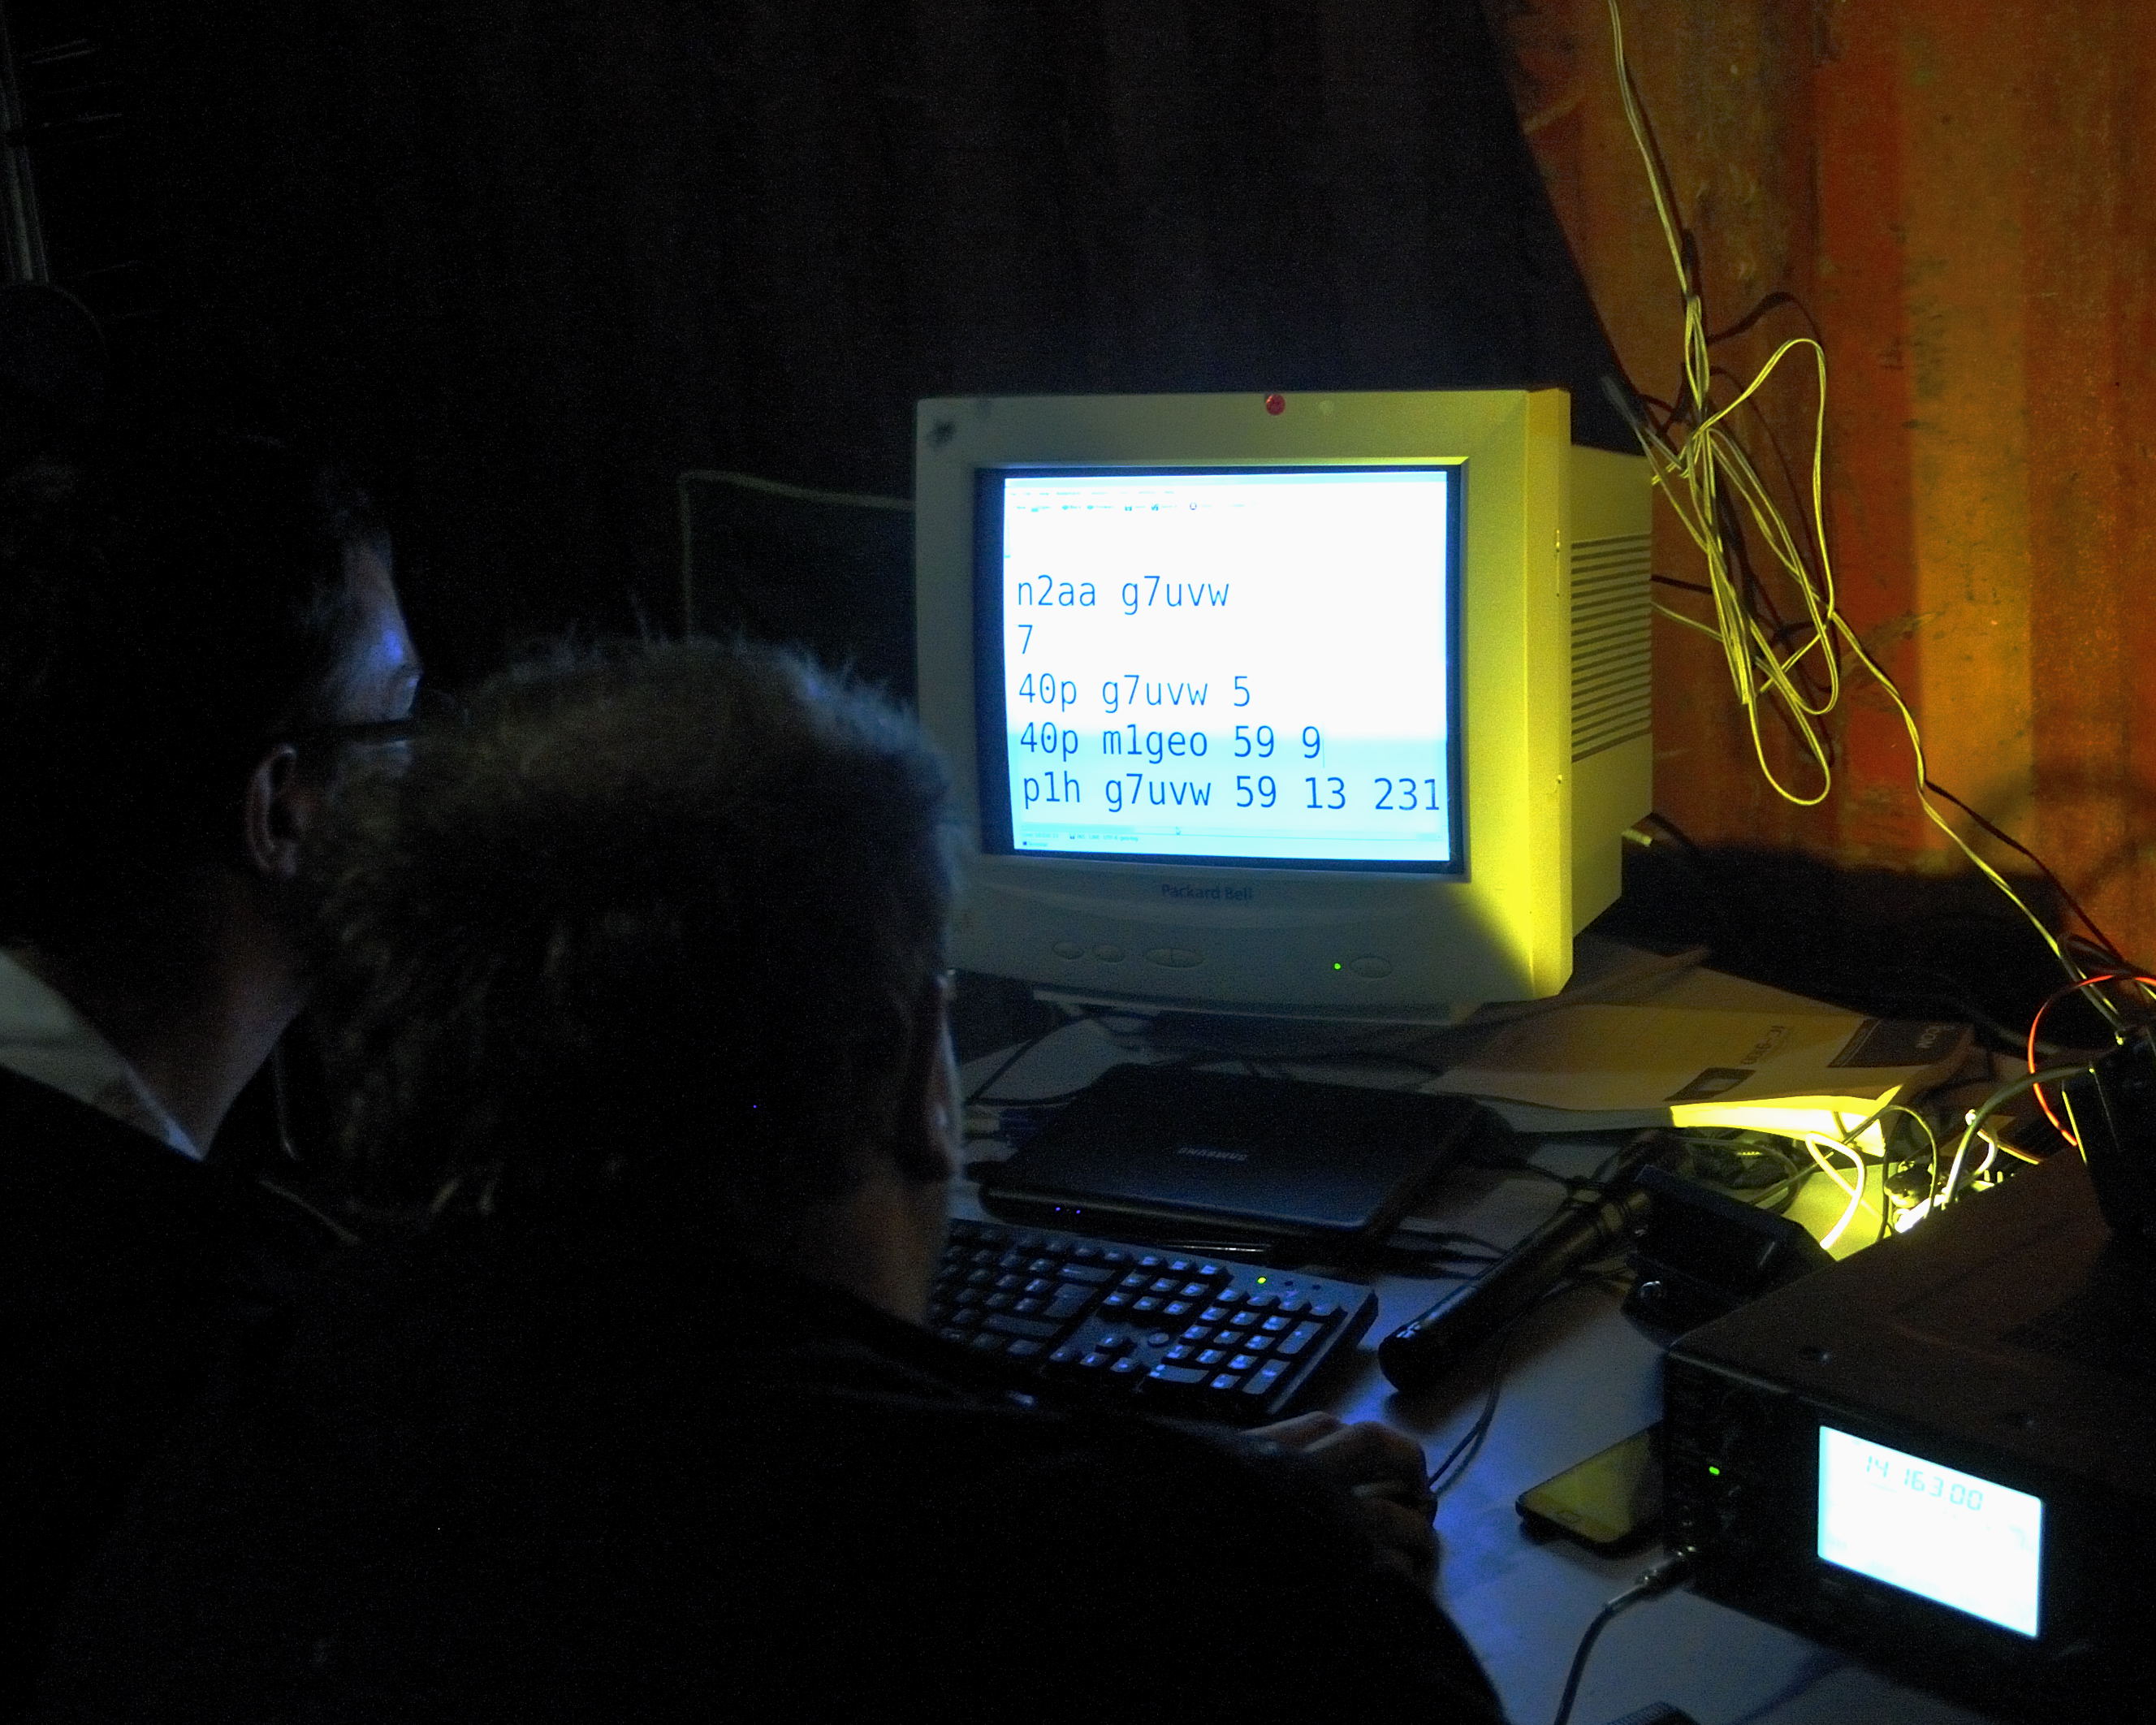 Pictures from CQWW 2013